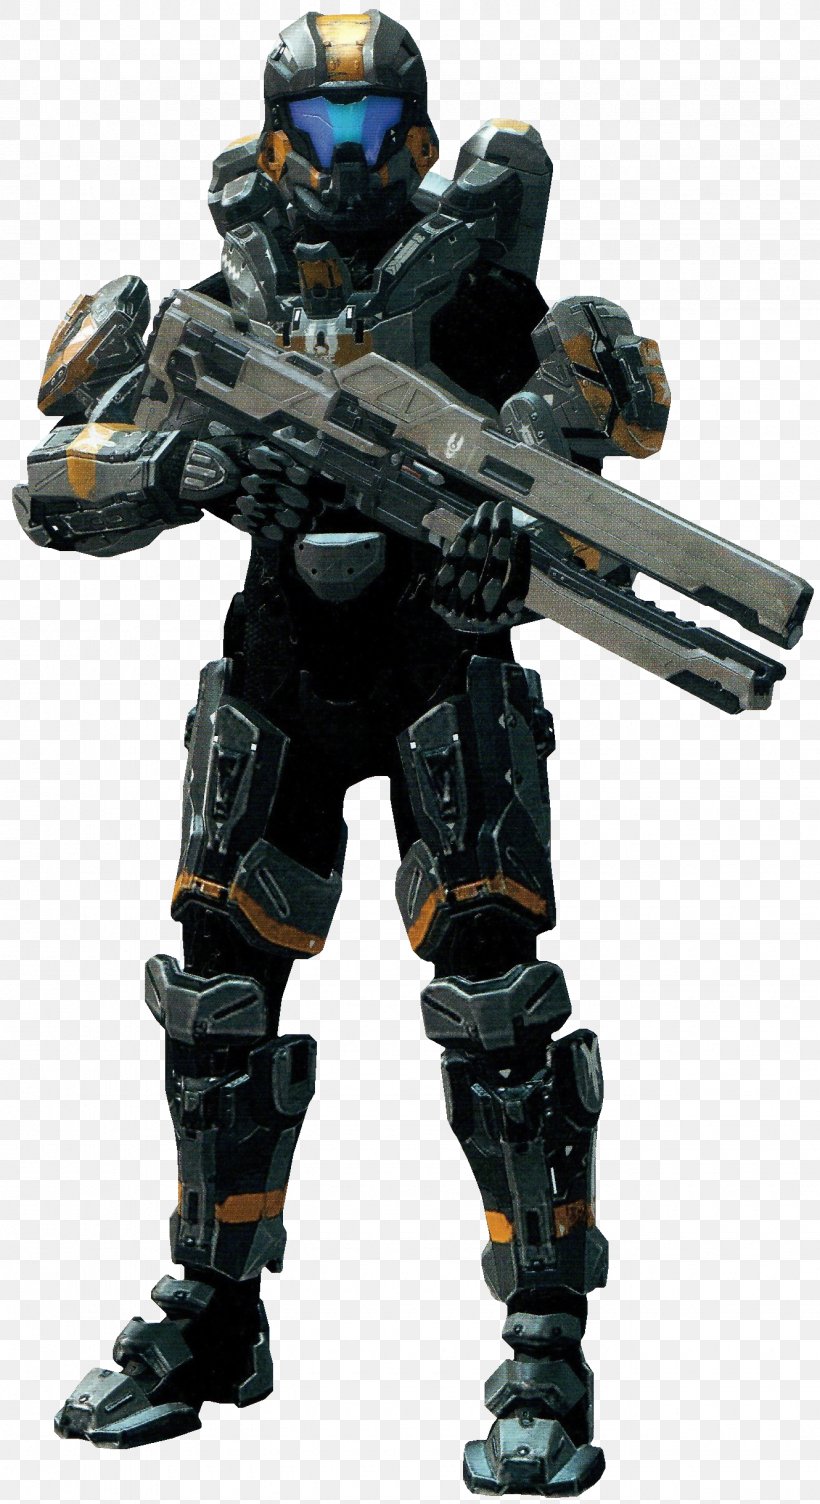 Halo 4 Halo: Reach Halo 5: Guardians Halo: Spartan Assault Master Chief, PNG, 1330x2440px, 343 Industries, Halo 4, Action Figure, Bungie, Figurine Download Free